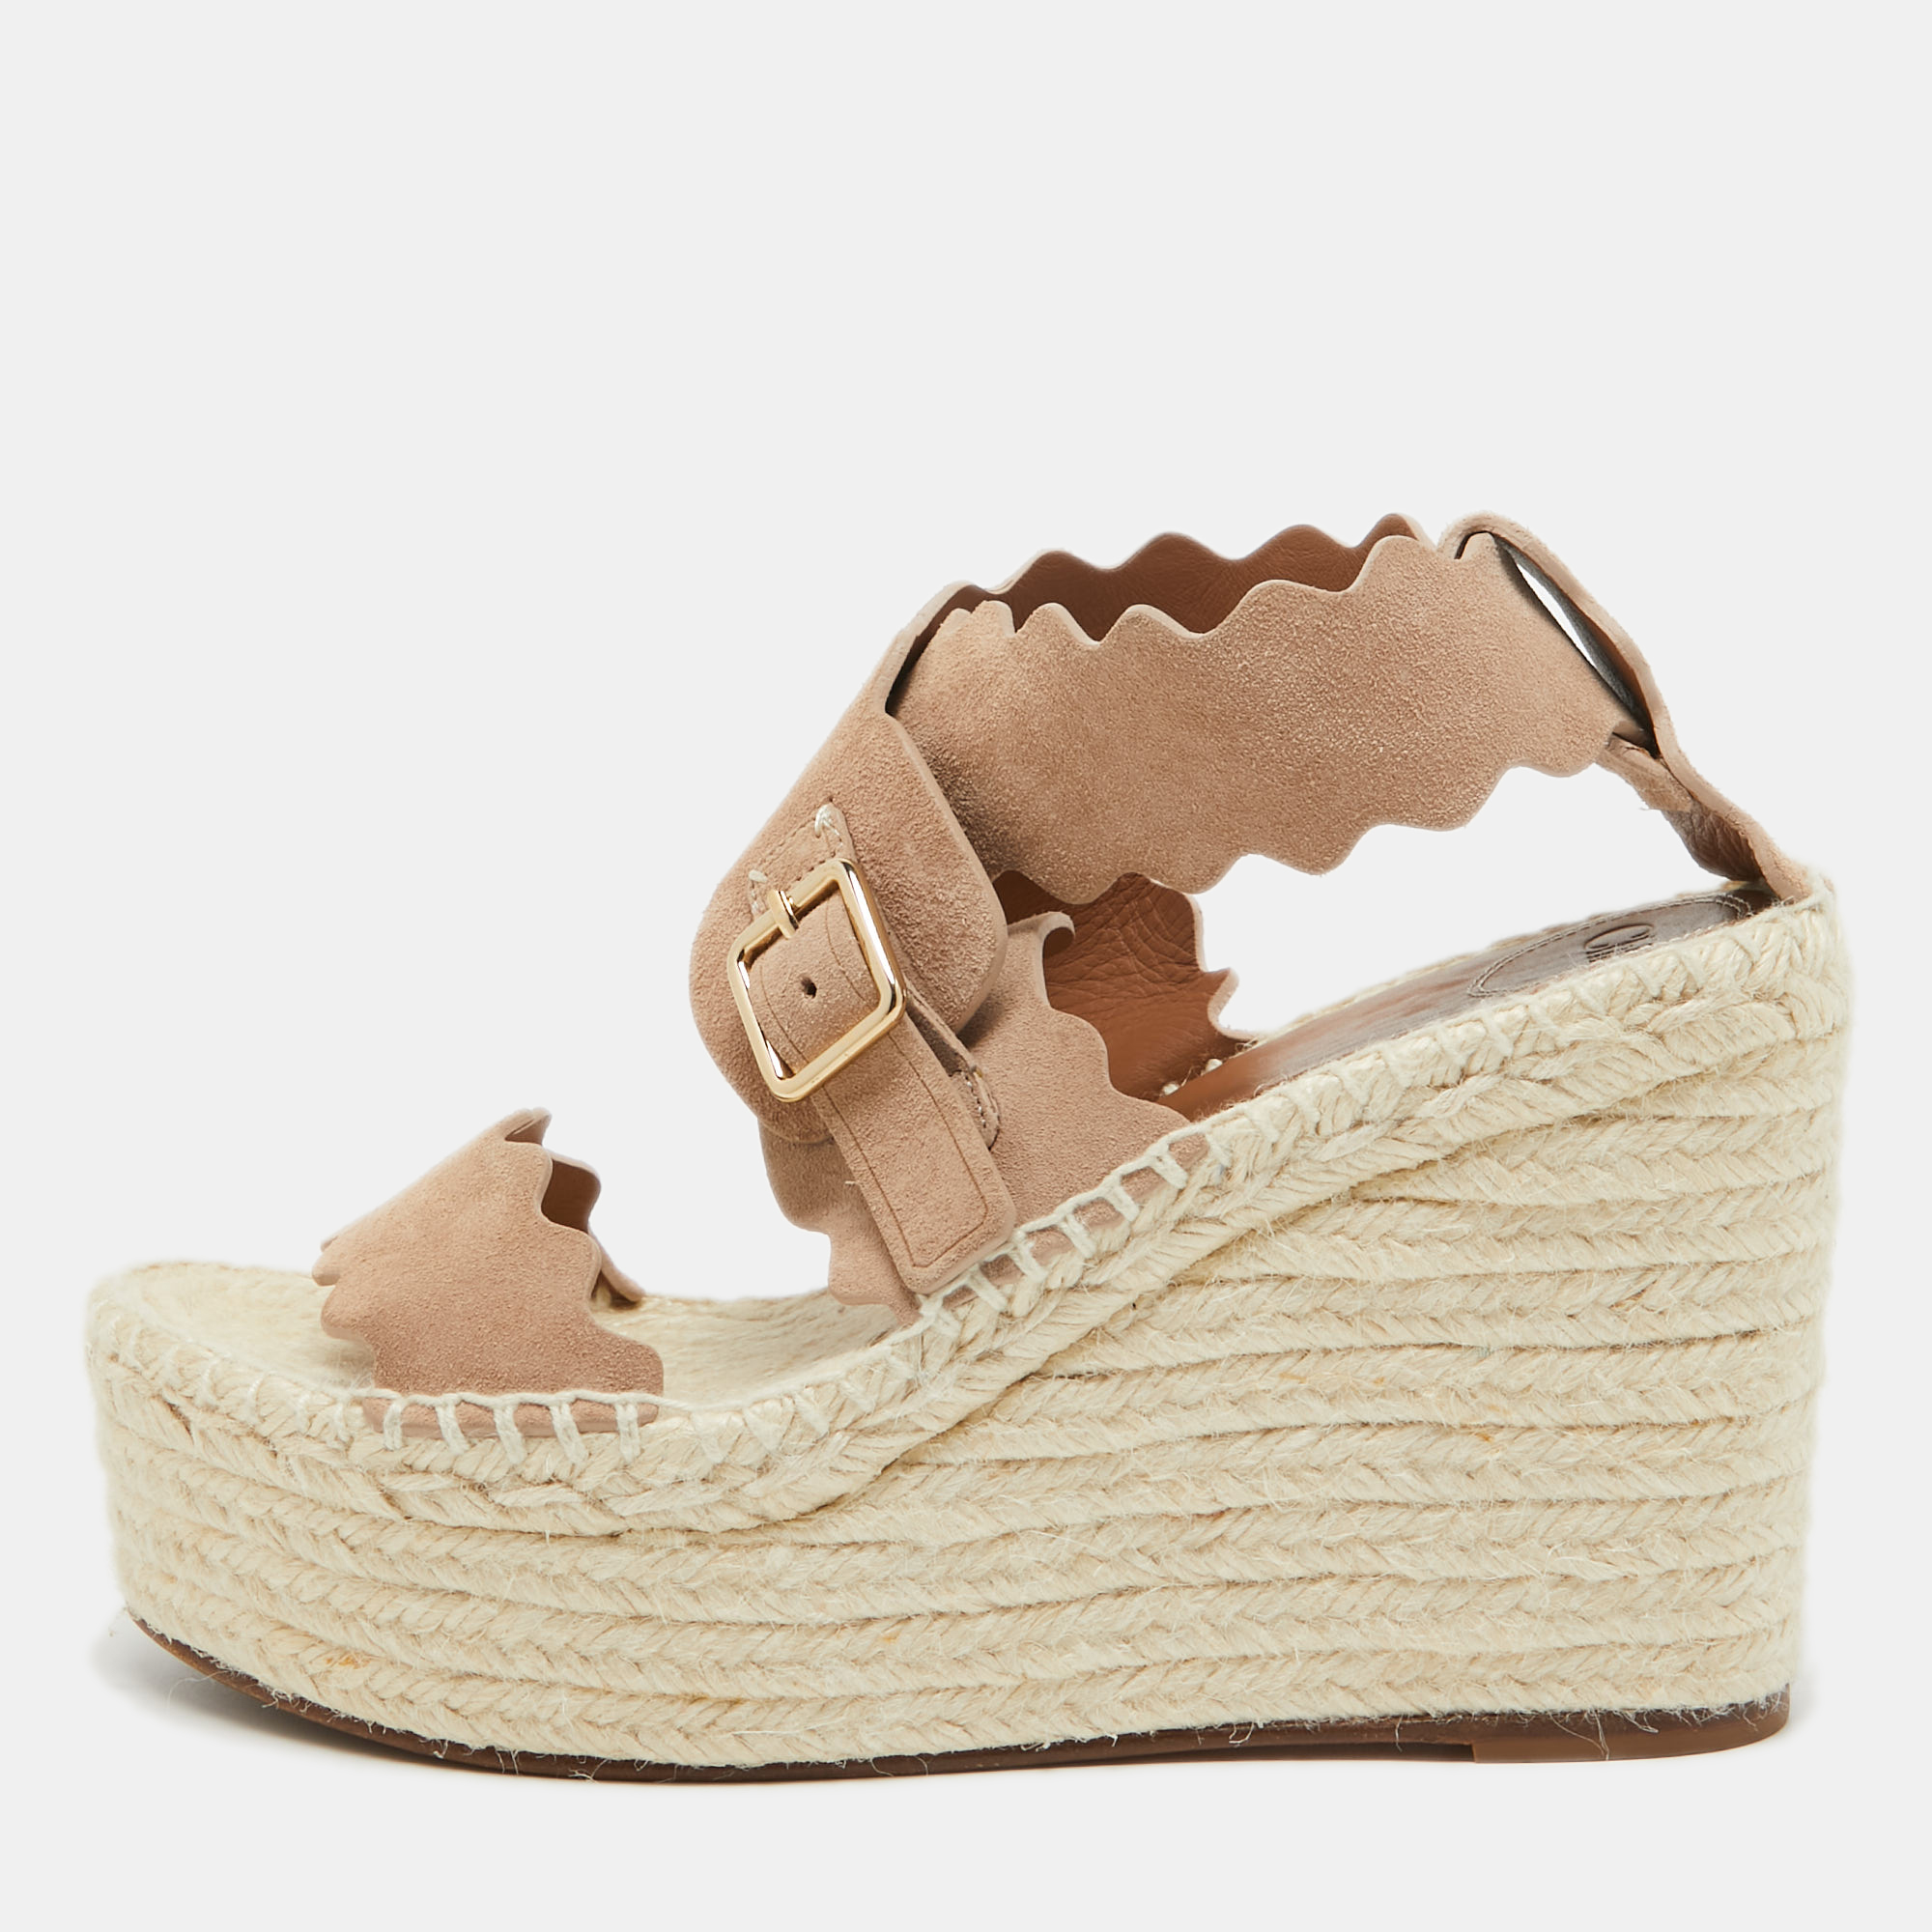 Pre-owned Chloé Beige Suede Lauren Scalloped Espadrille Wage Sandals Size 39